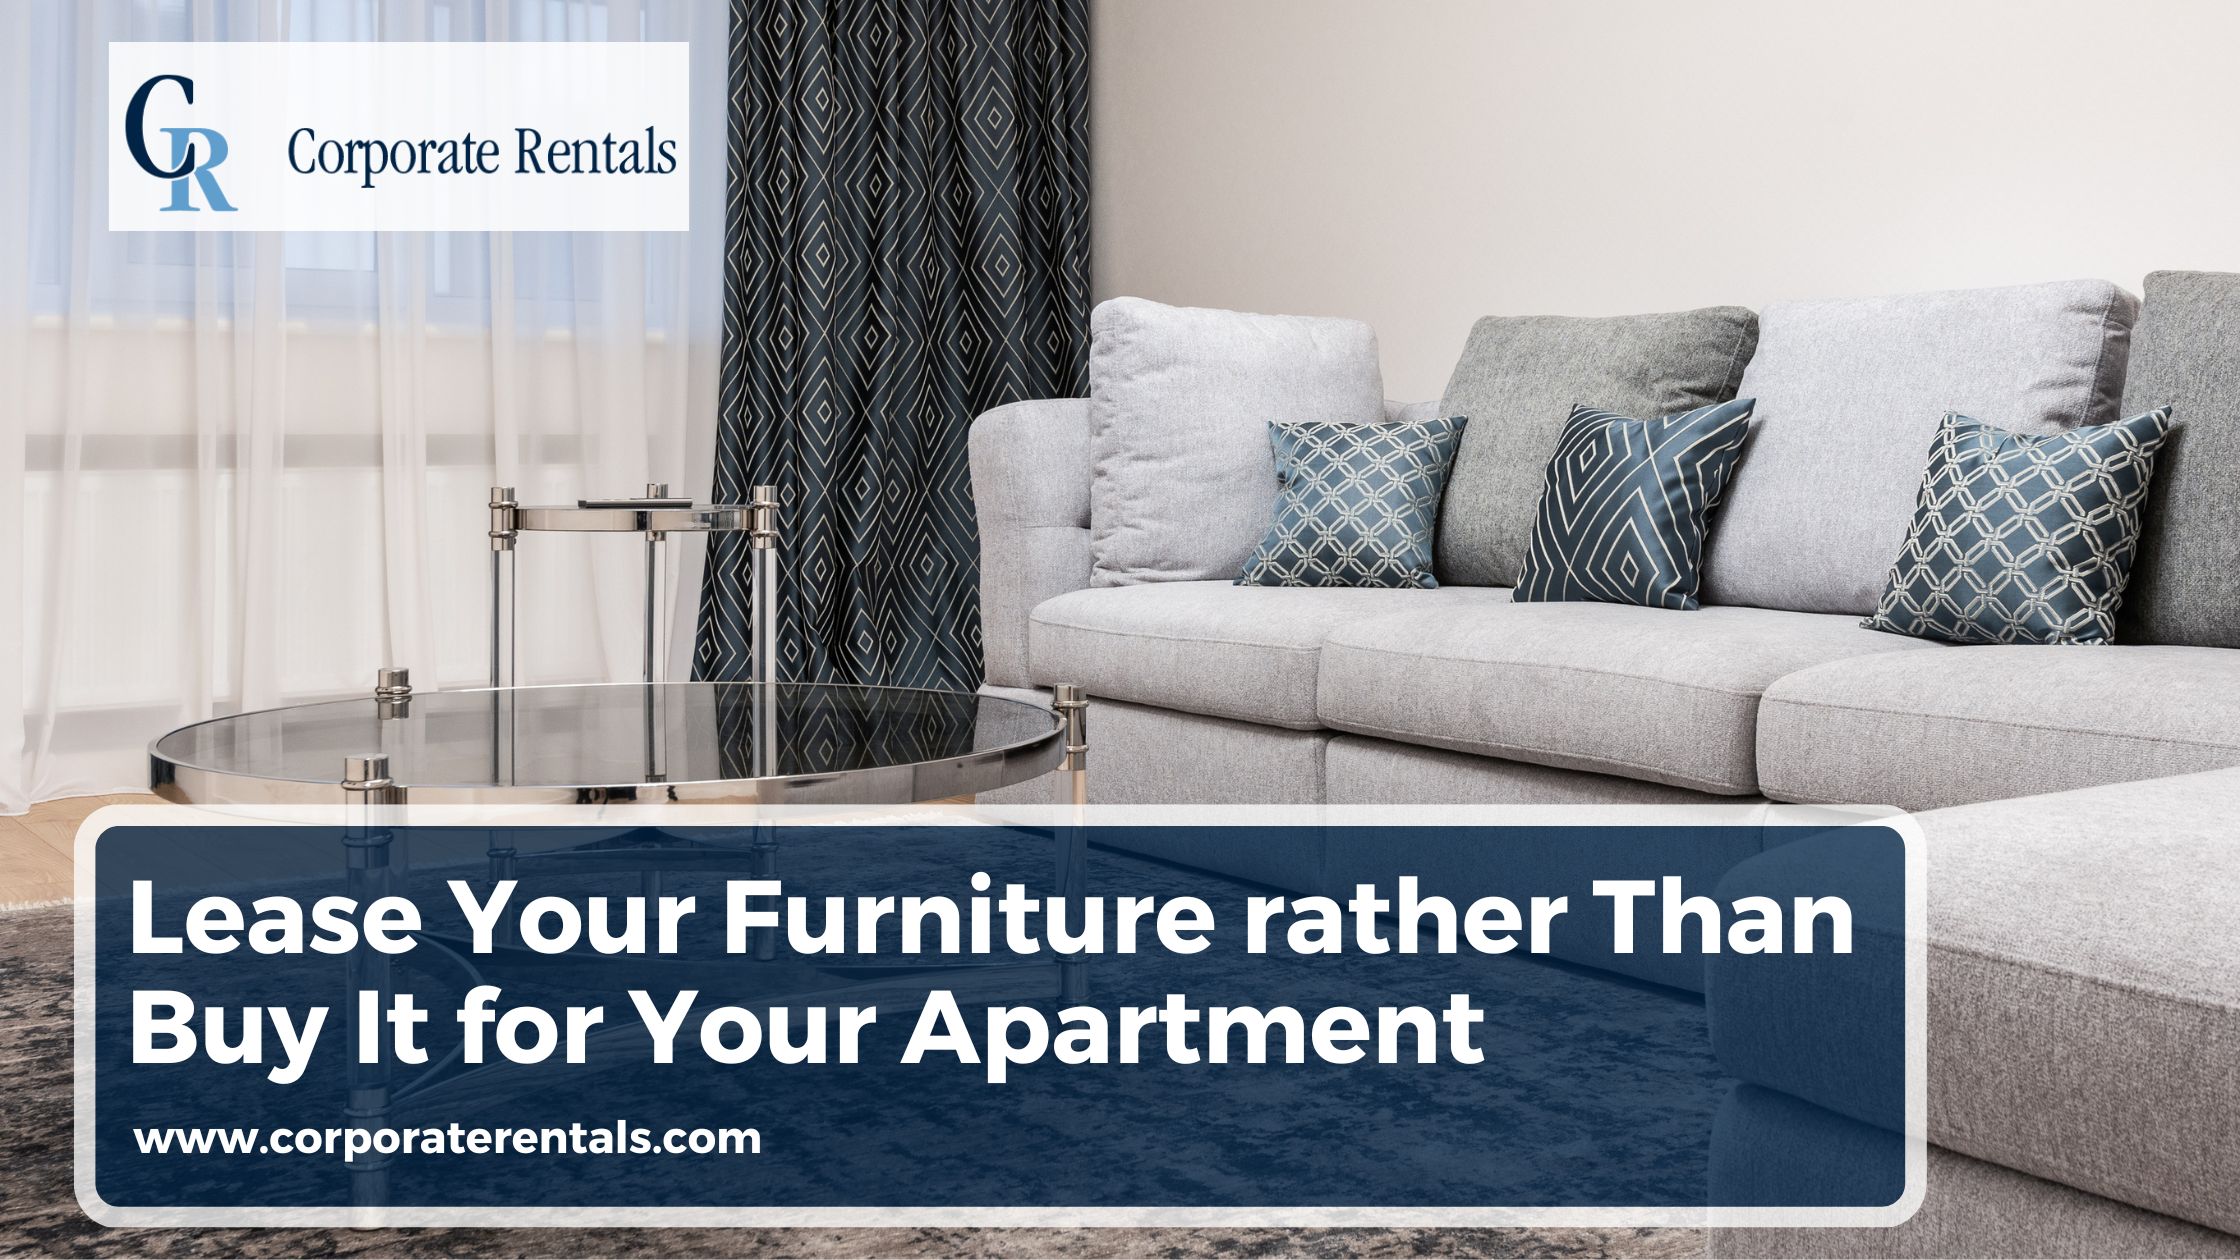 Reasons: Lease Your Furniture rather Than Buy It for Your Apartment